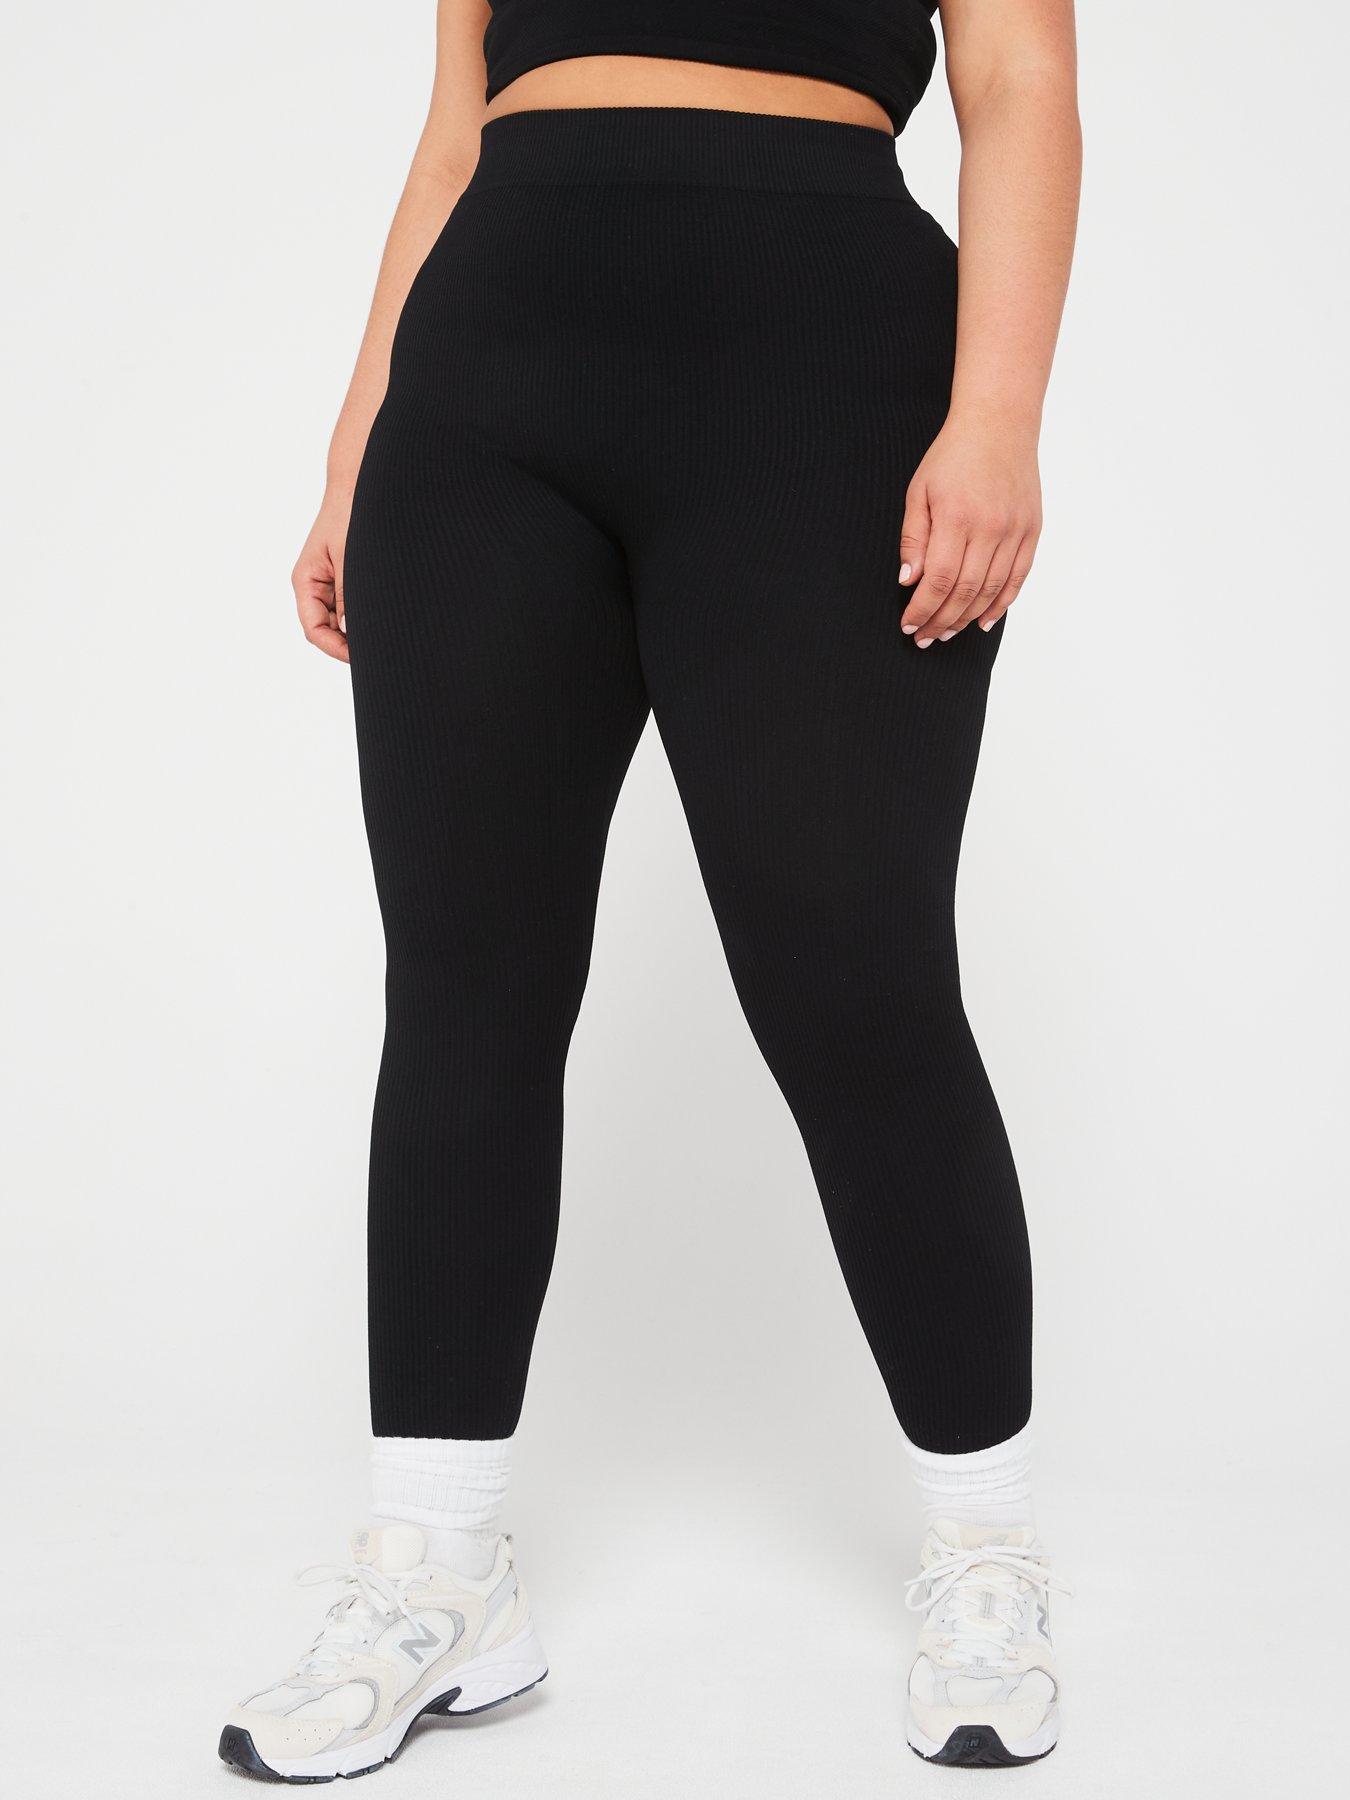 V by Very Tall Confident Curve Legging - Black